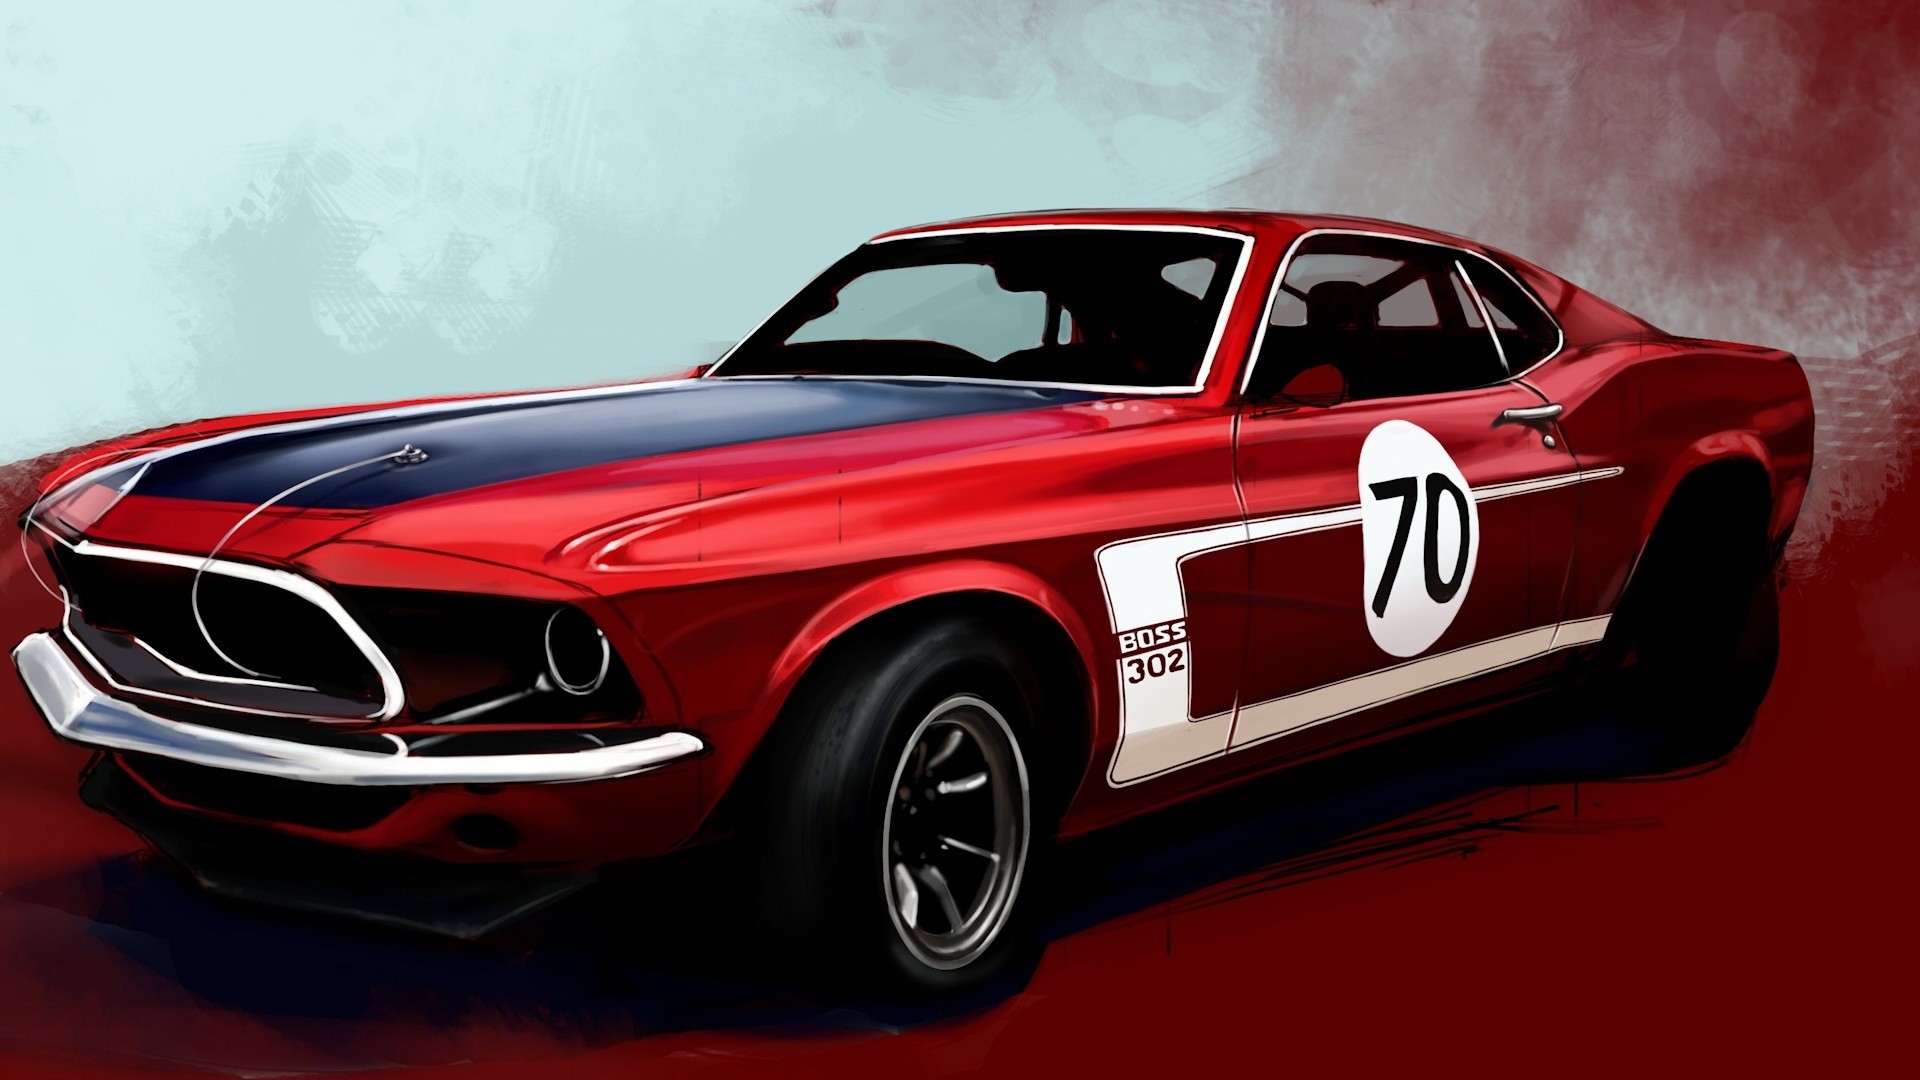 1920x1080 Ford boss mustang wallpapers.